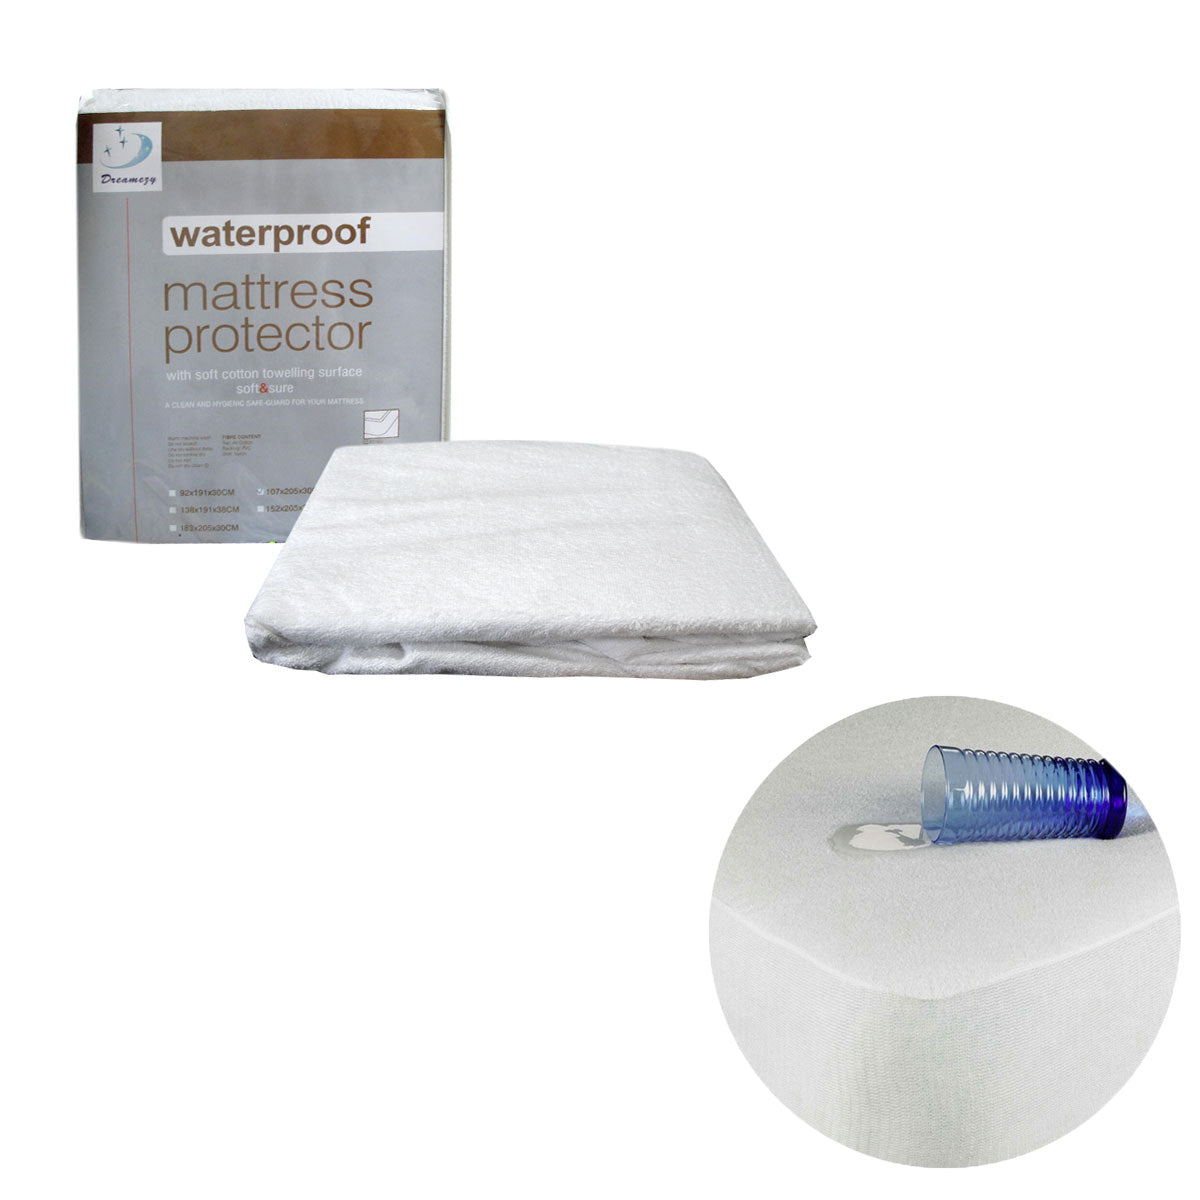 Fully Fitted Terry Waterproof Mattress Protector 30cm Wall - Newstart Furniture